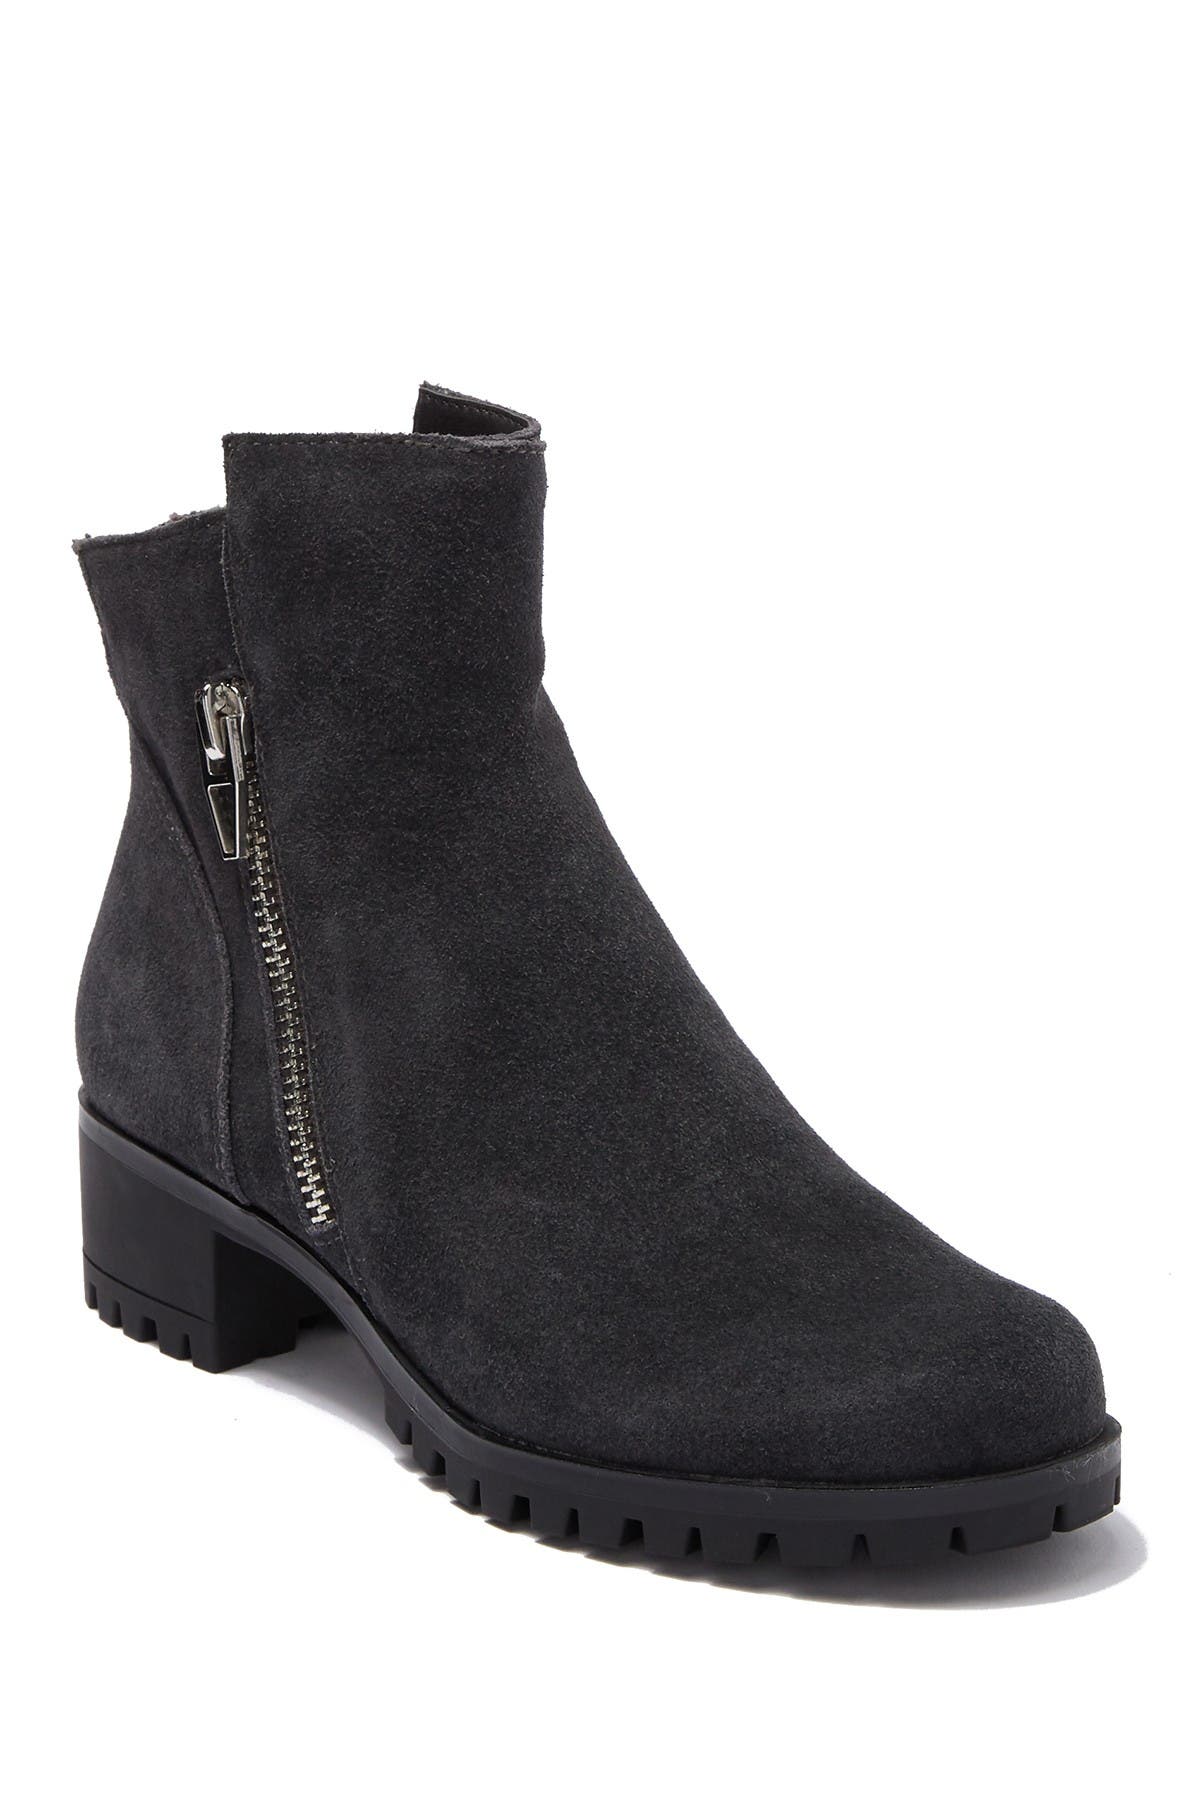 Dolce Vita | Pym Suede Ankle Bootie 